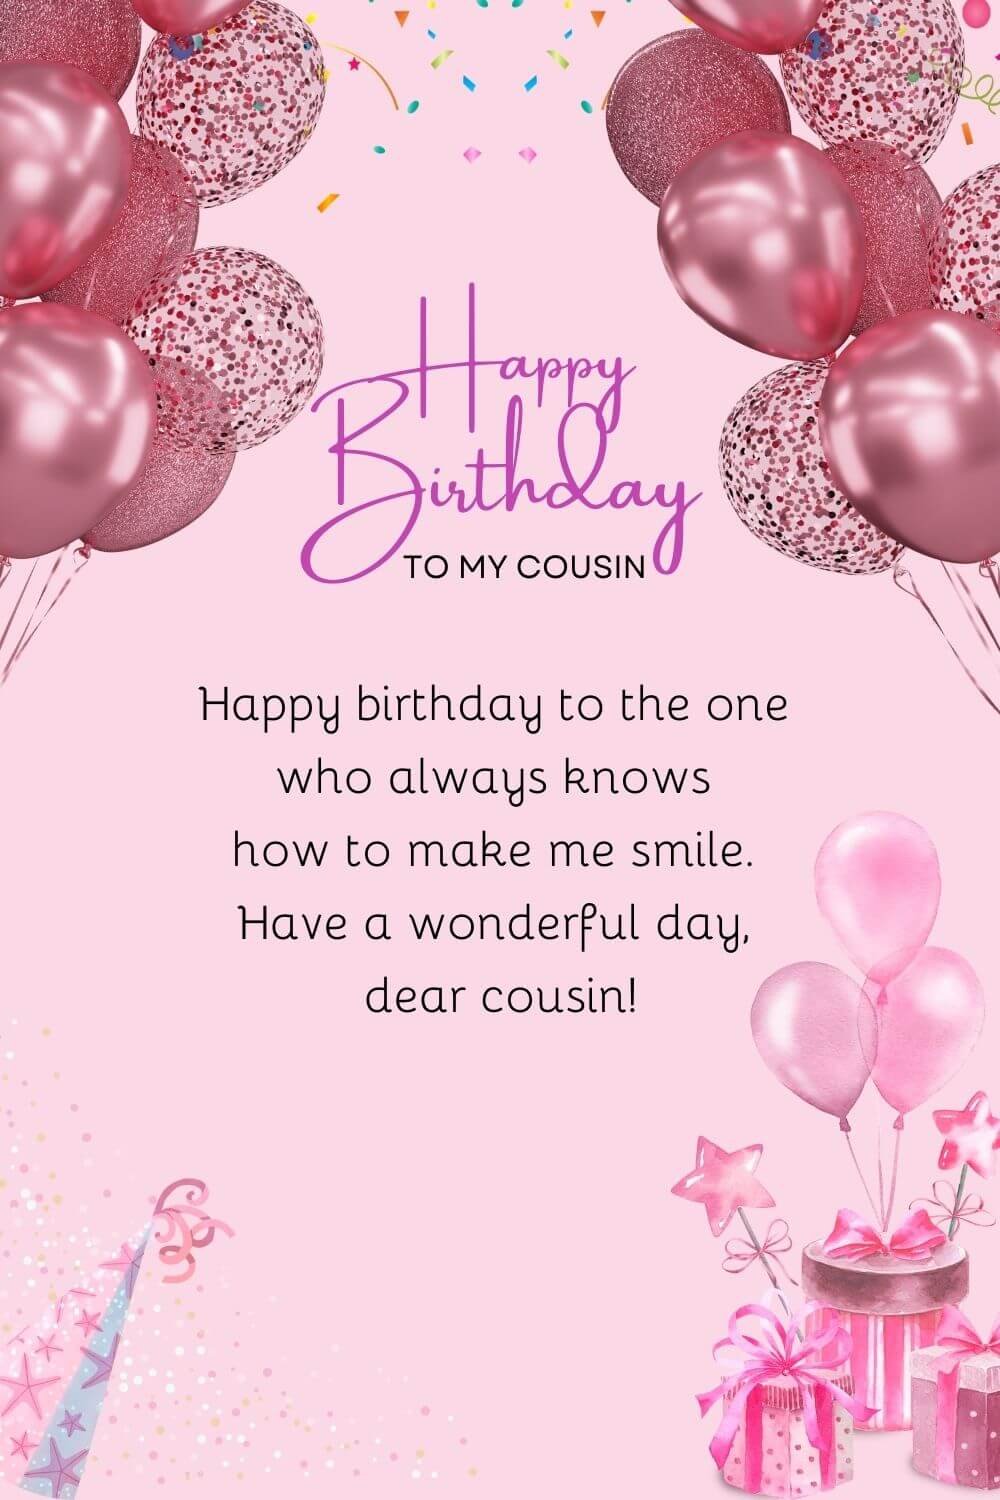 dear cousin birthday lines images hd